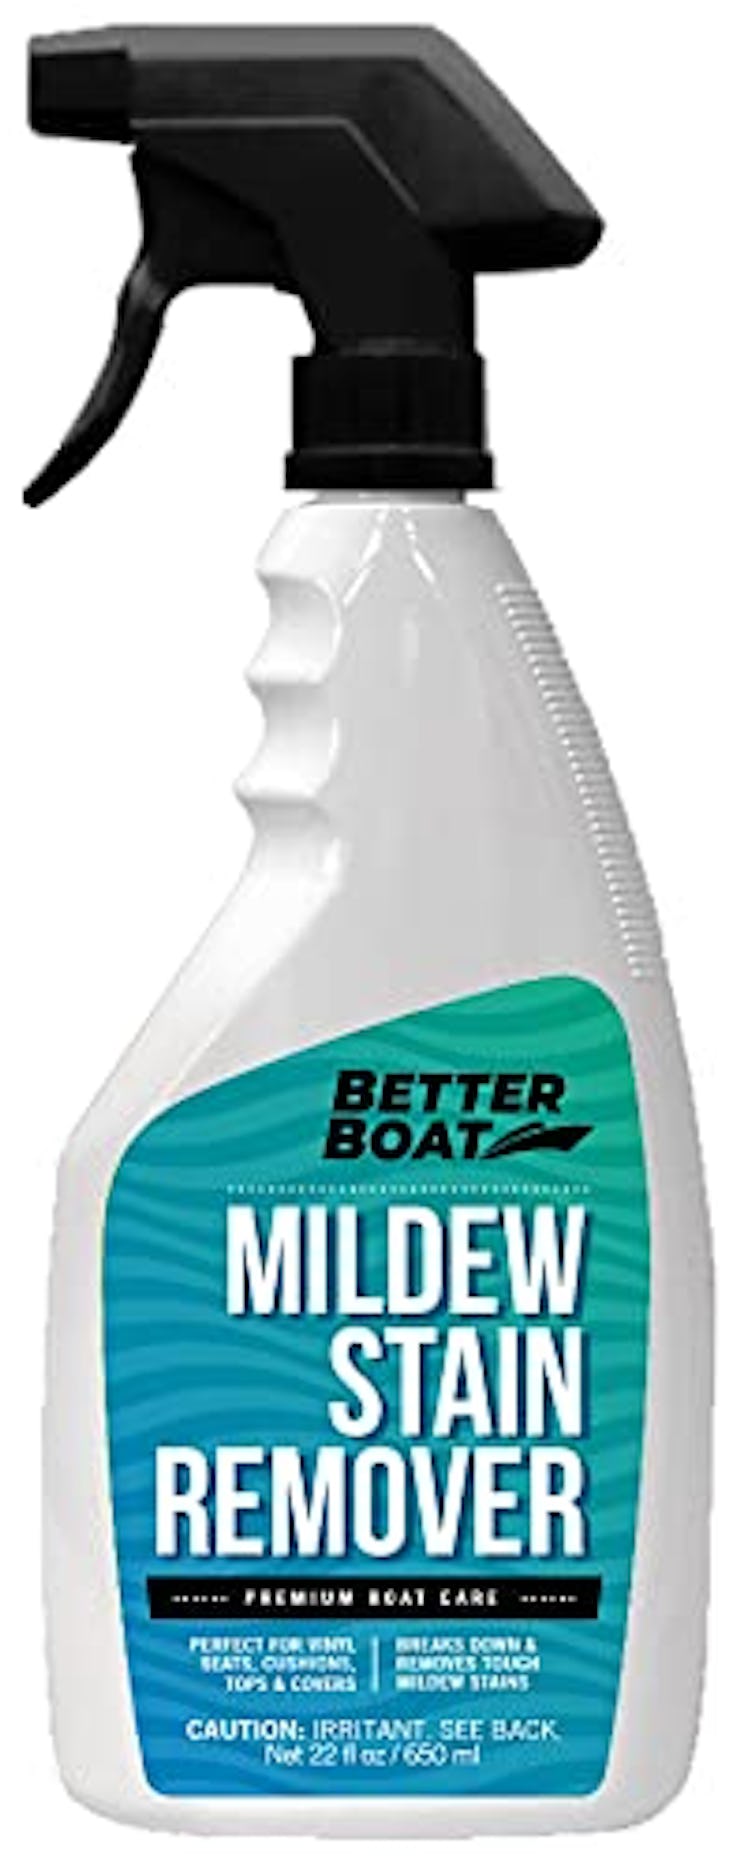 Better Boat Mold and Mildew Stain Remover Cleaner